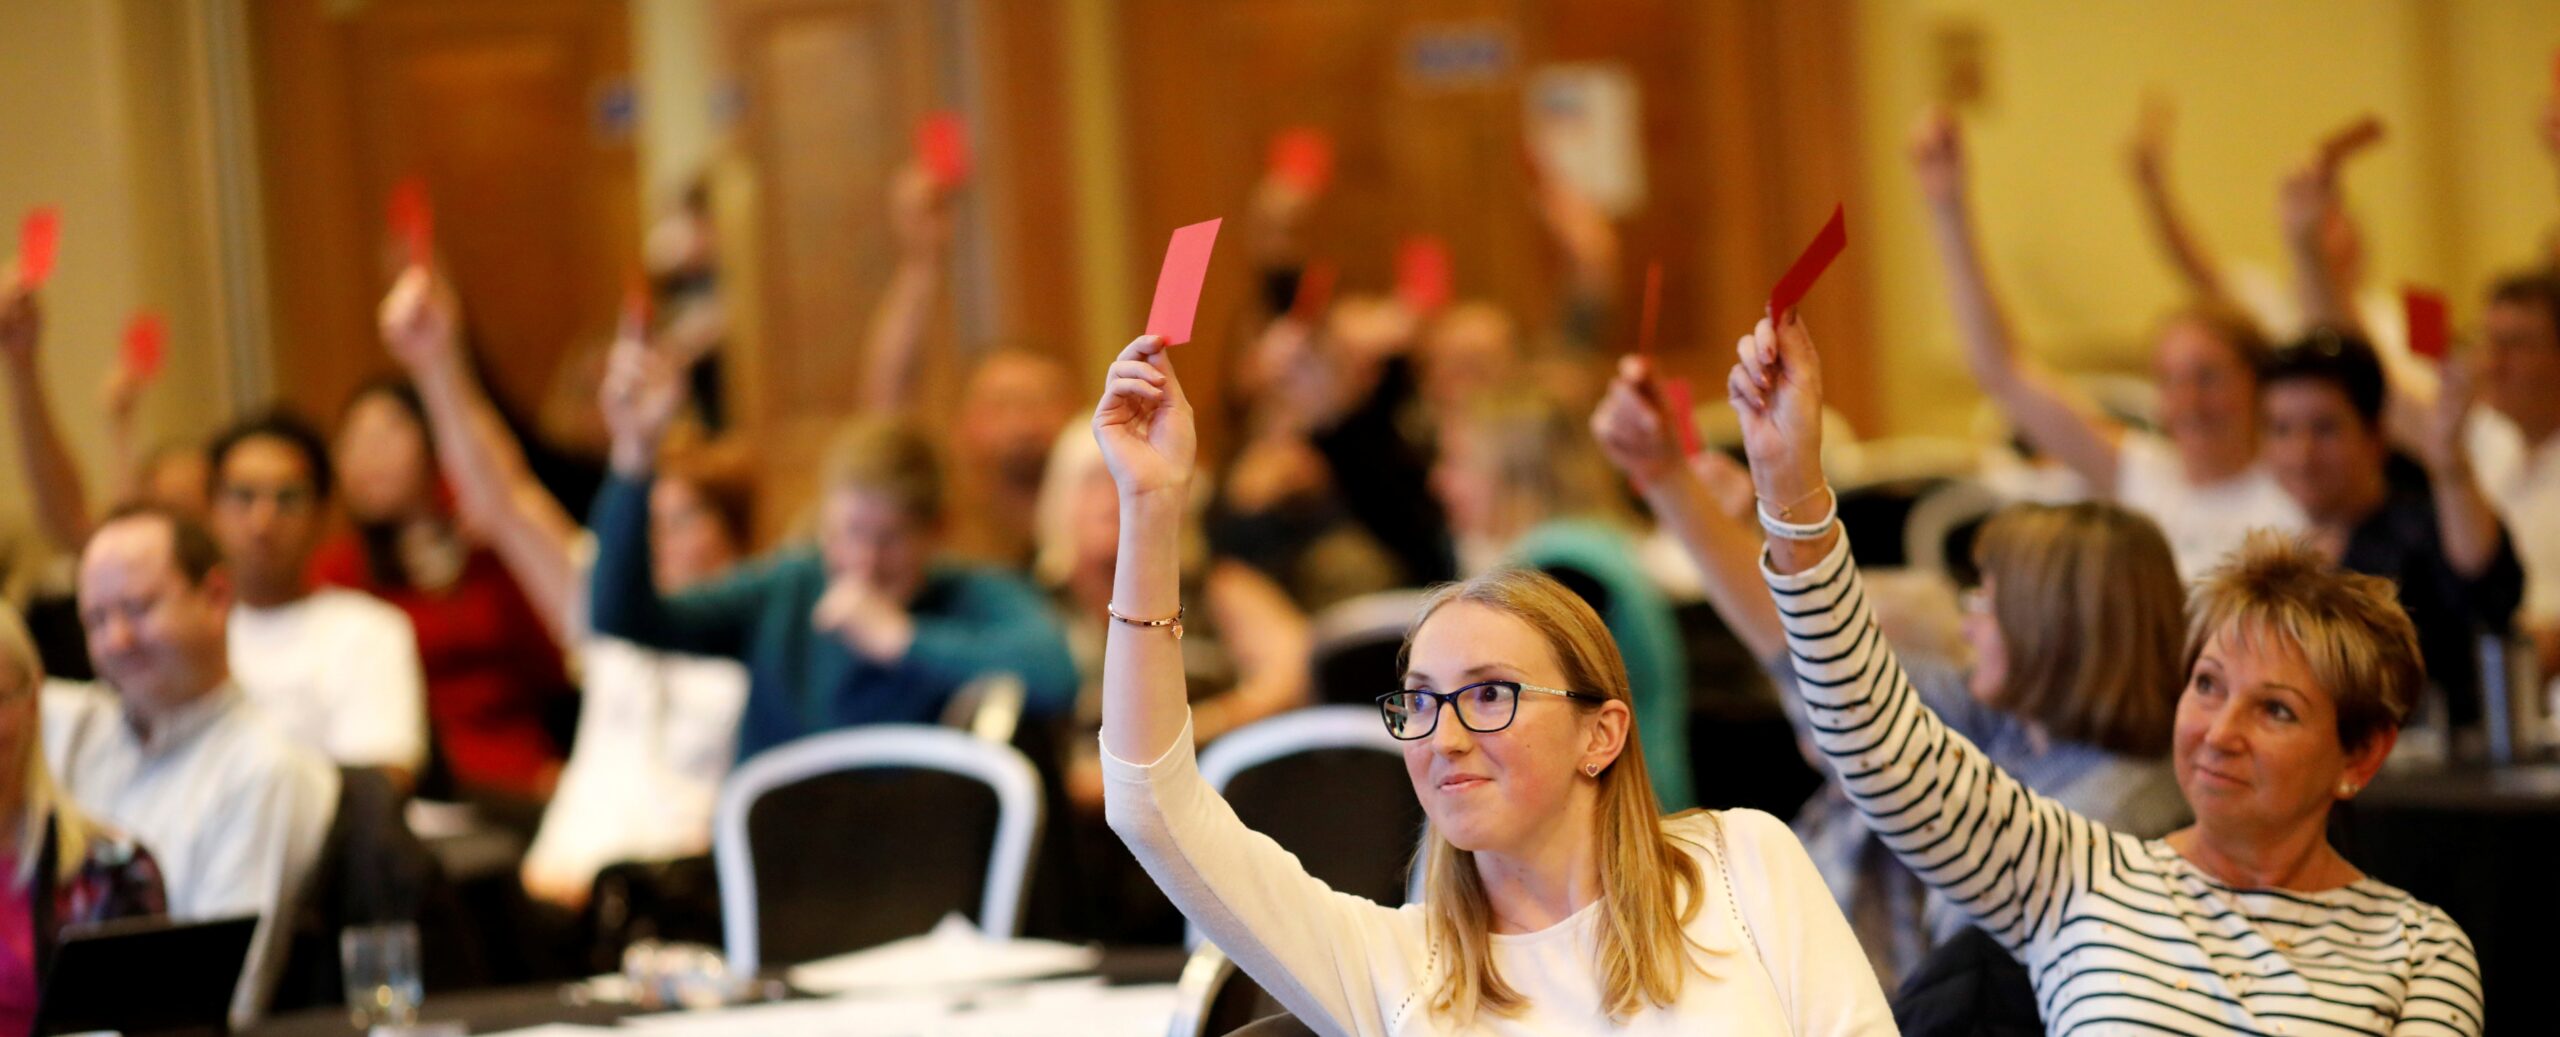 Nystagmus Network members hold up their voting cards.